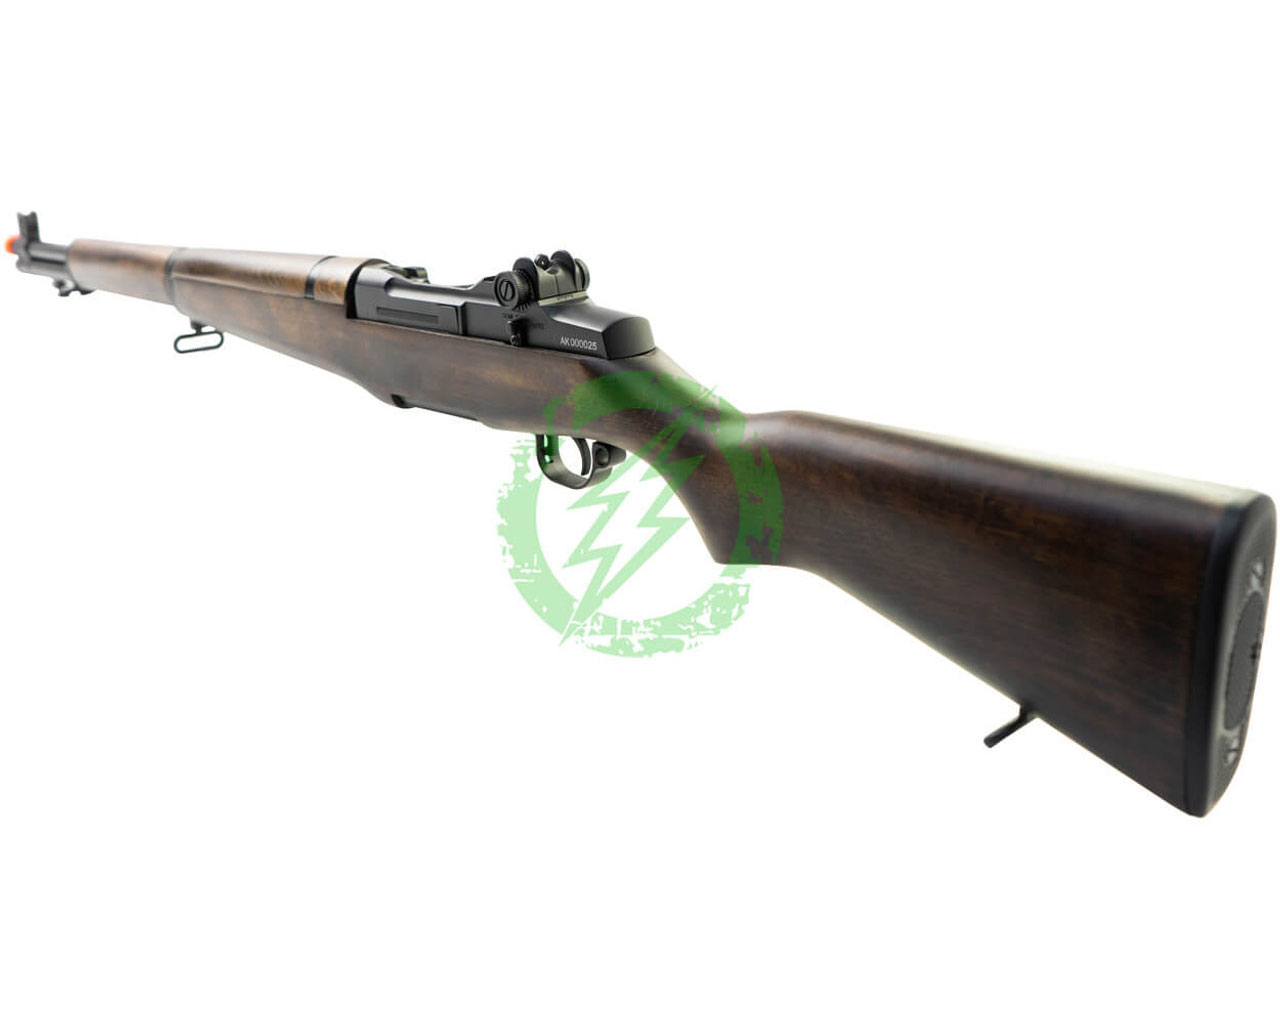 Amped Airsoft A&K M1 Garand With Real Wood Kit 03